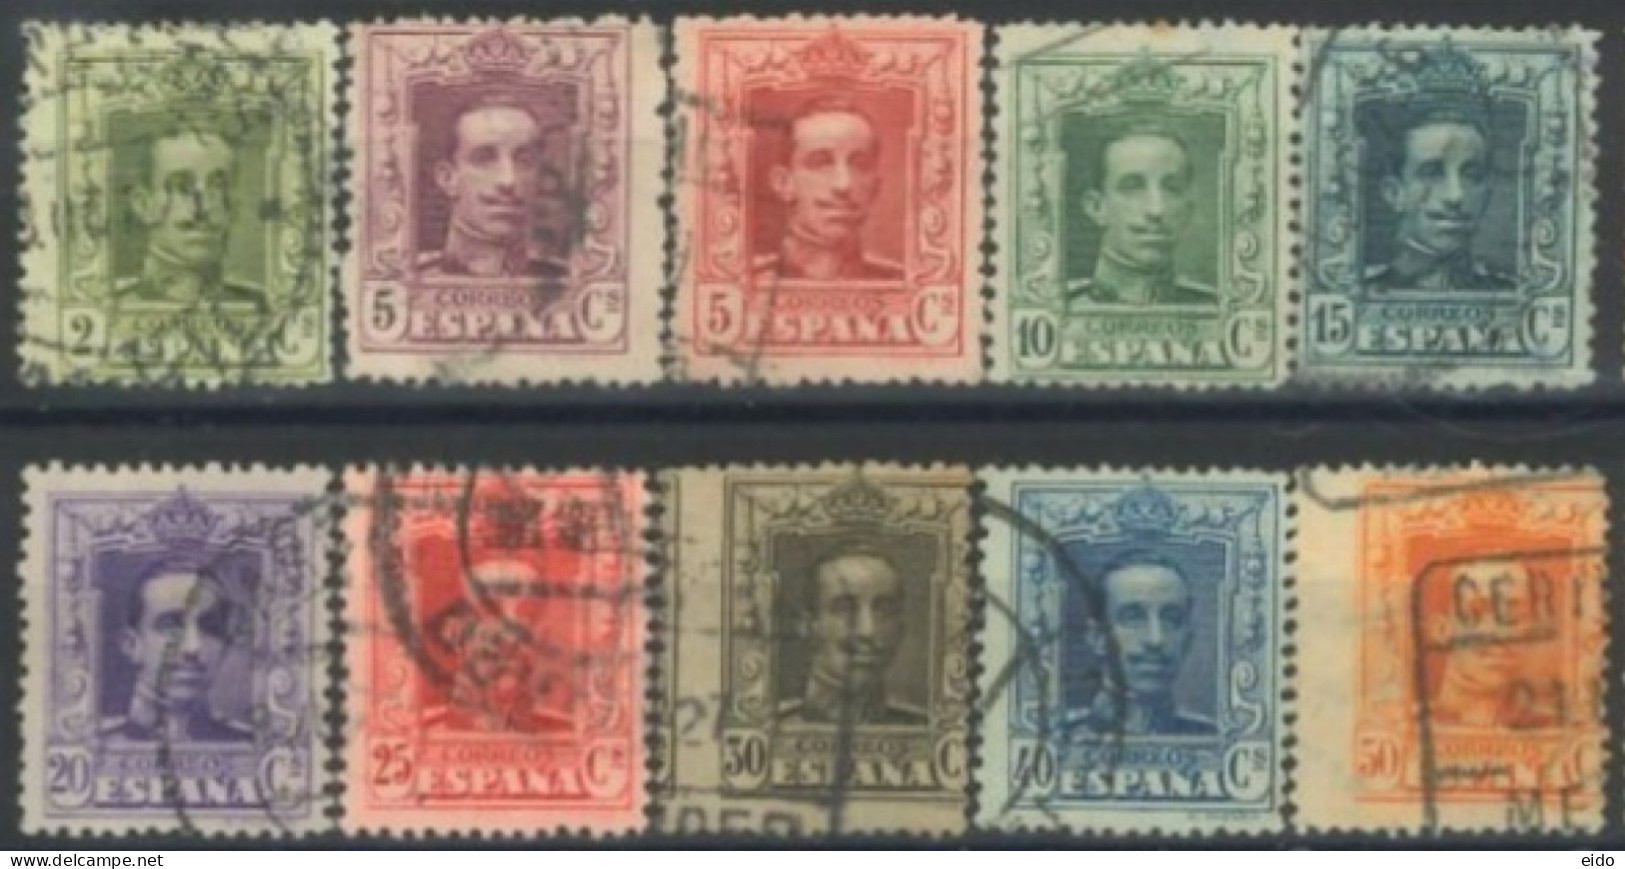 SPAIN, 1922/26, KING ALFONSO XIII STAMPS SET OF 10, # 331/33, &335/41, USED. - Oblitérés